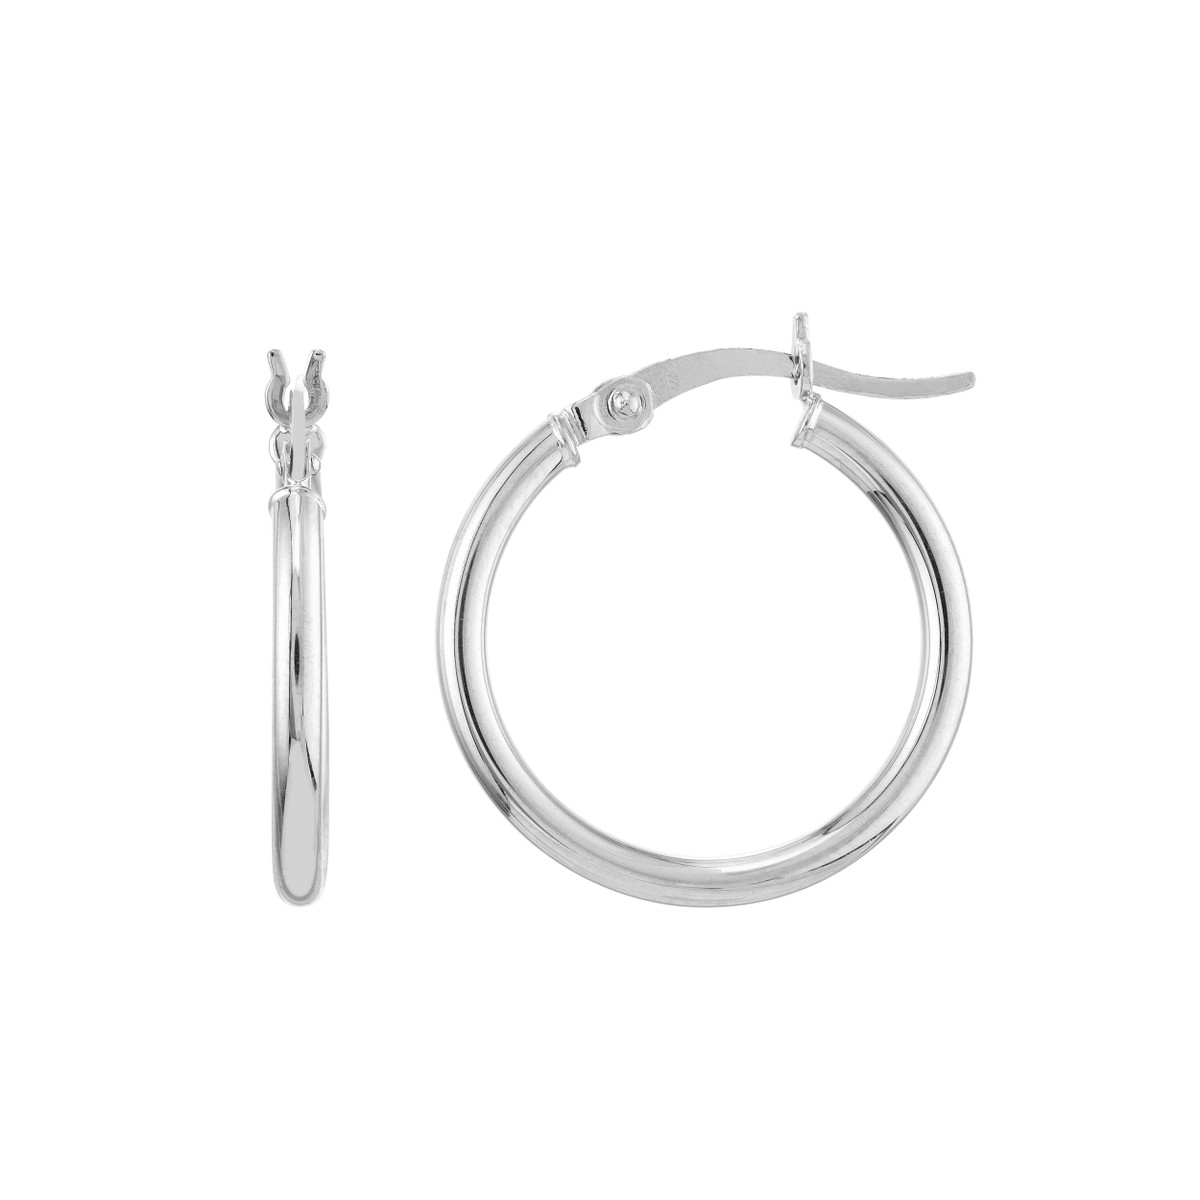 White Gold 20 mm Hoops